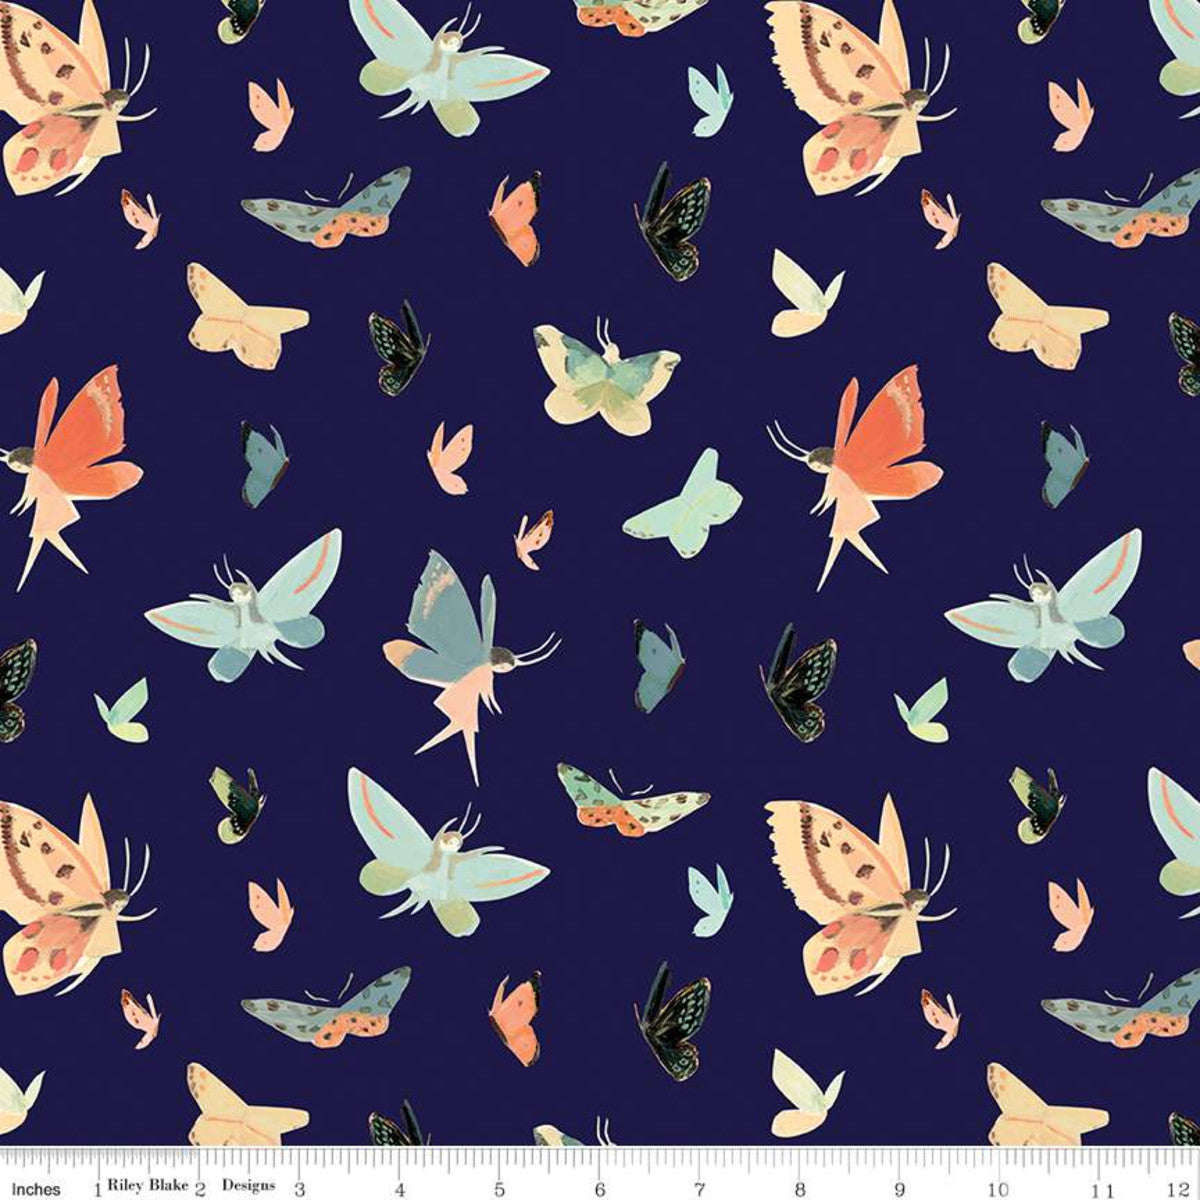 A World Of Pattern on Tumblr